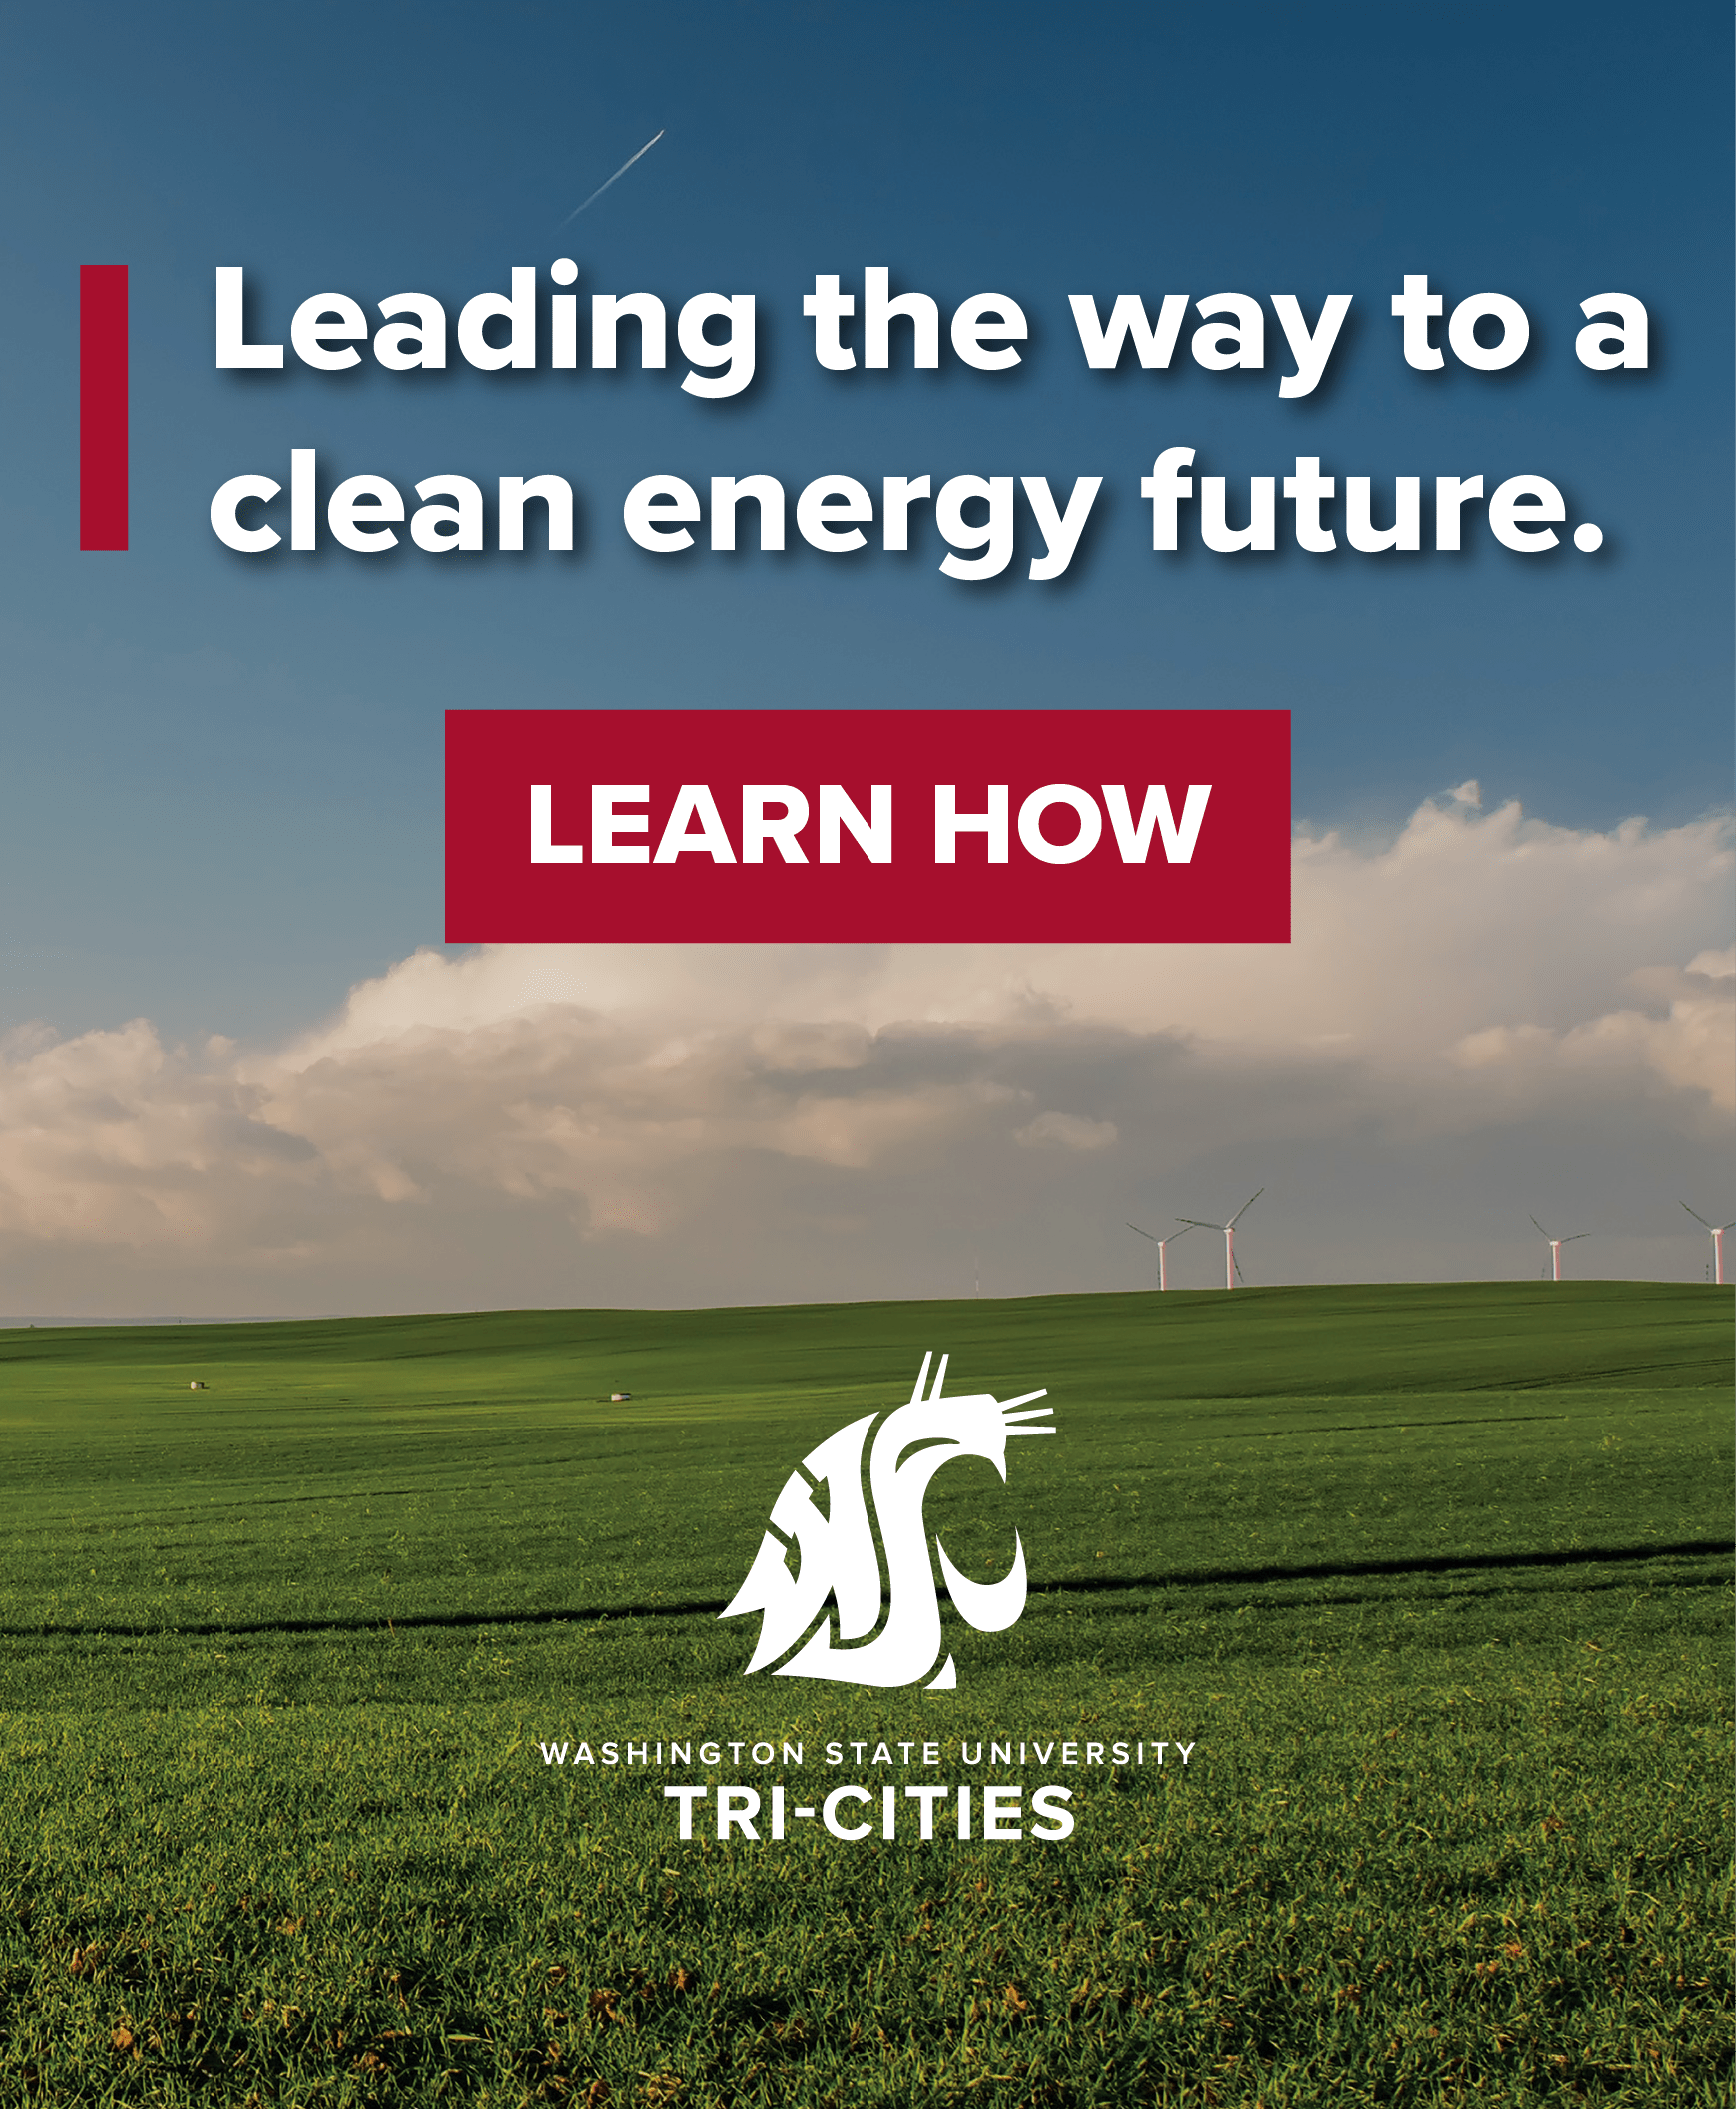 Leading the way to a clean energy future - learn how